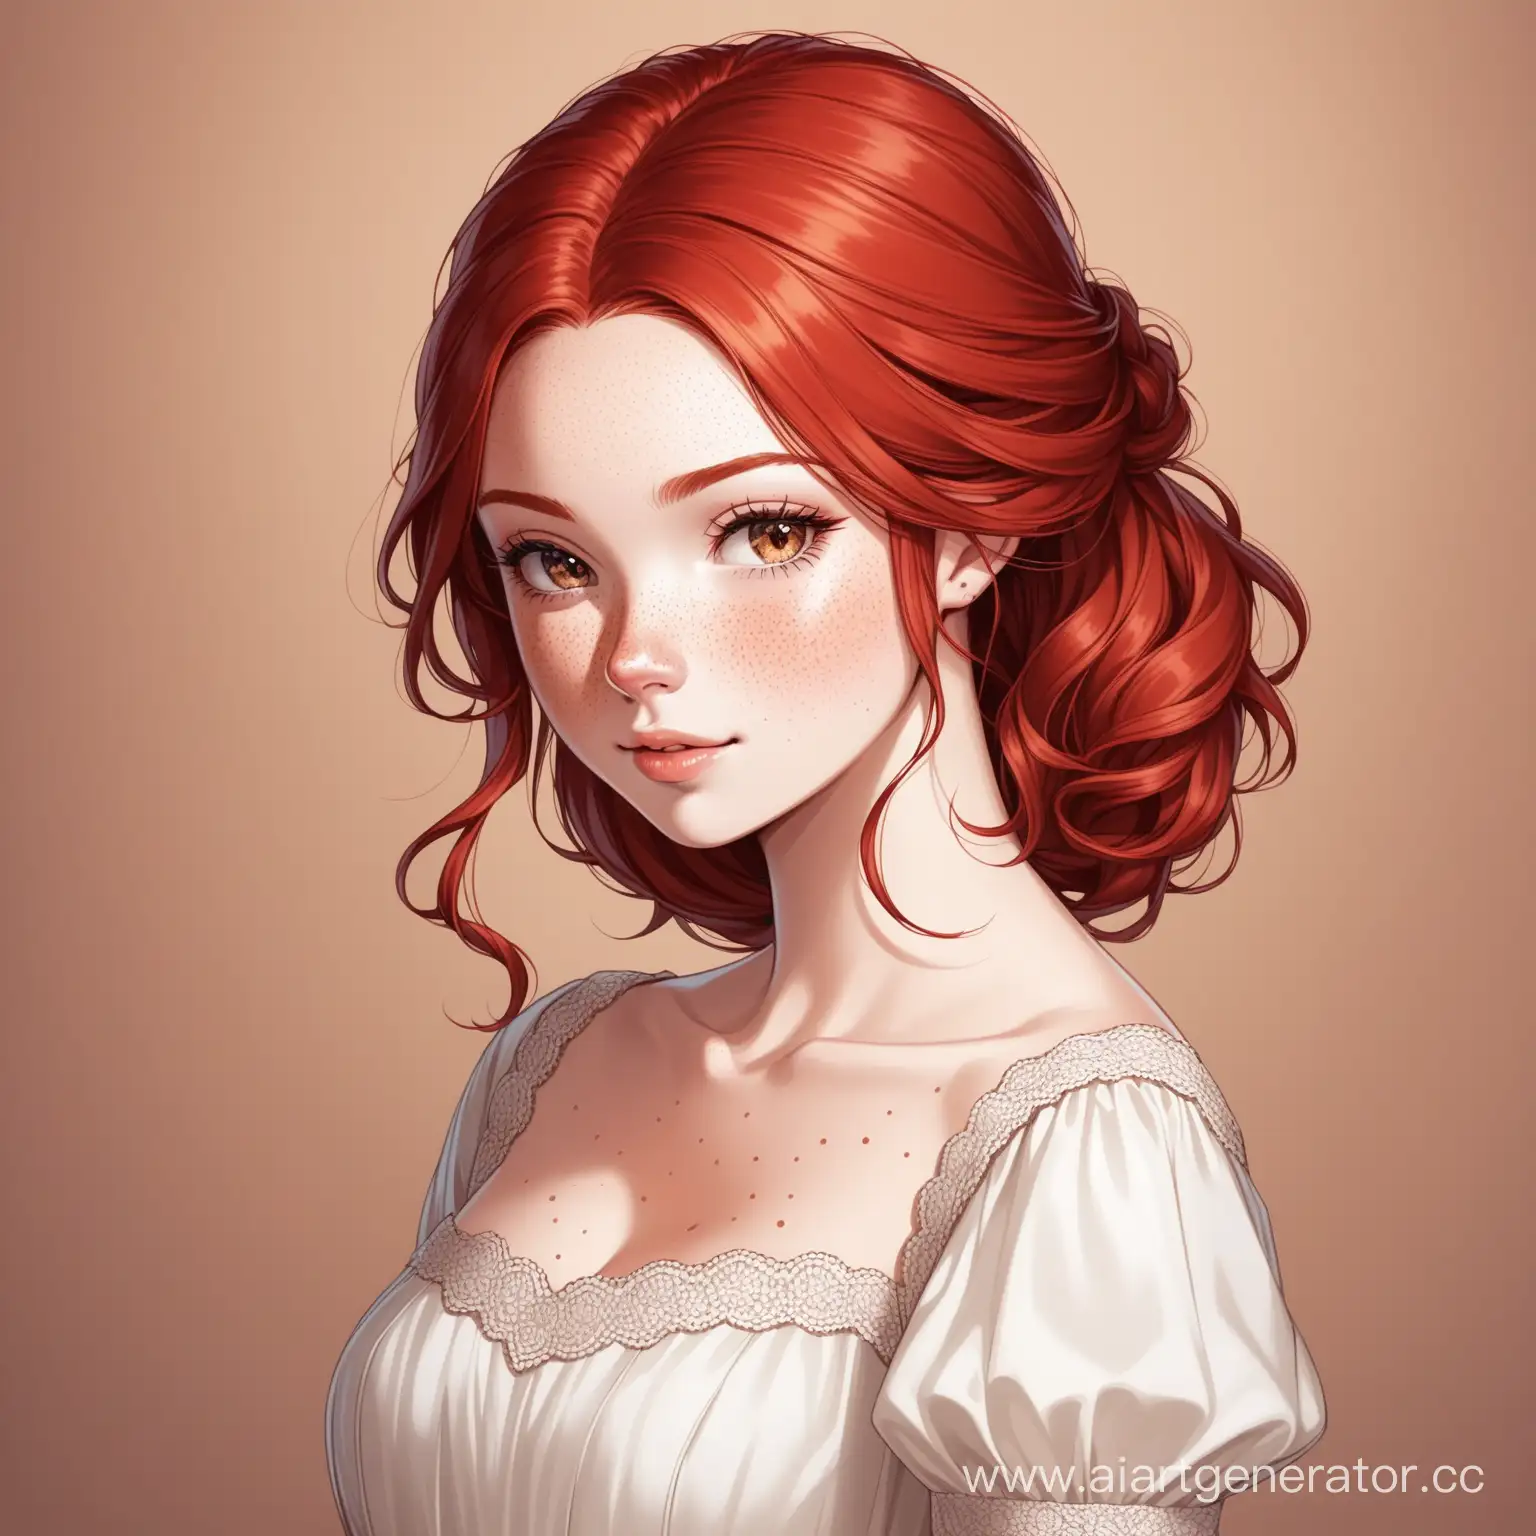 RedHaired-Aristocratic-Girl-with-Freckles-in-a-Dress